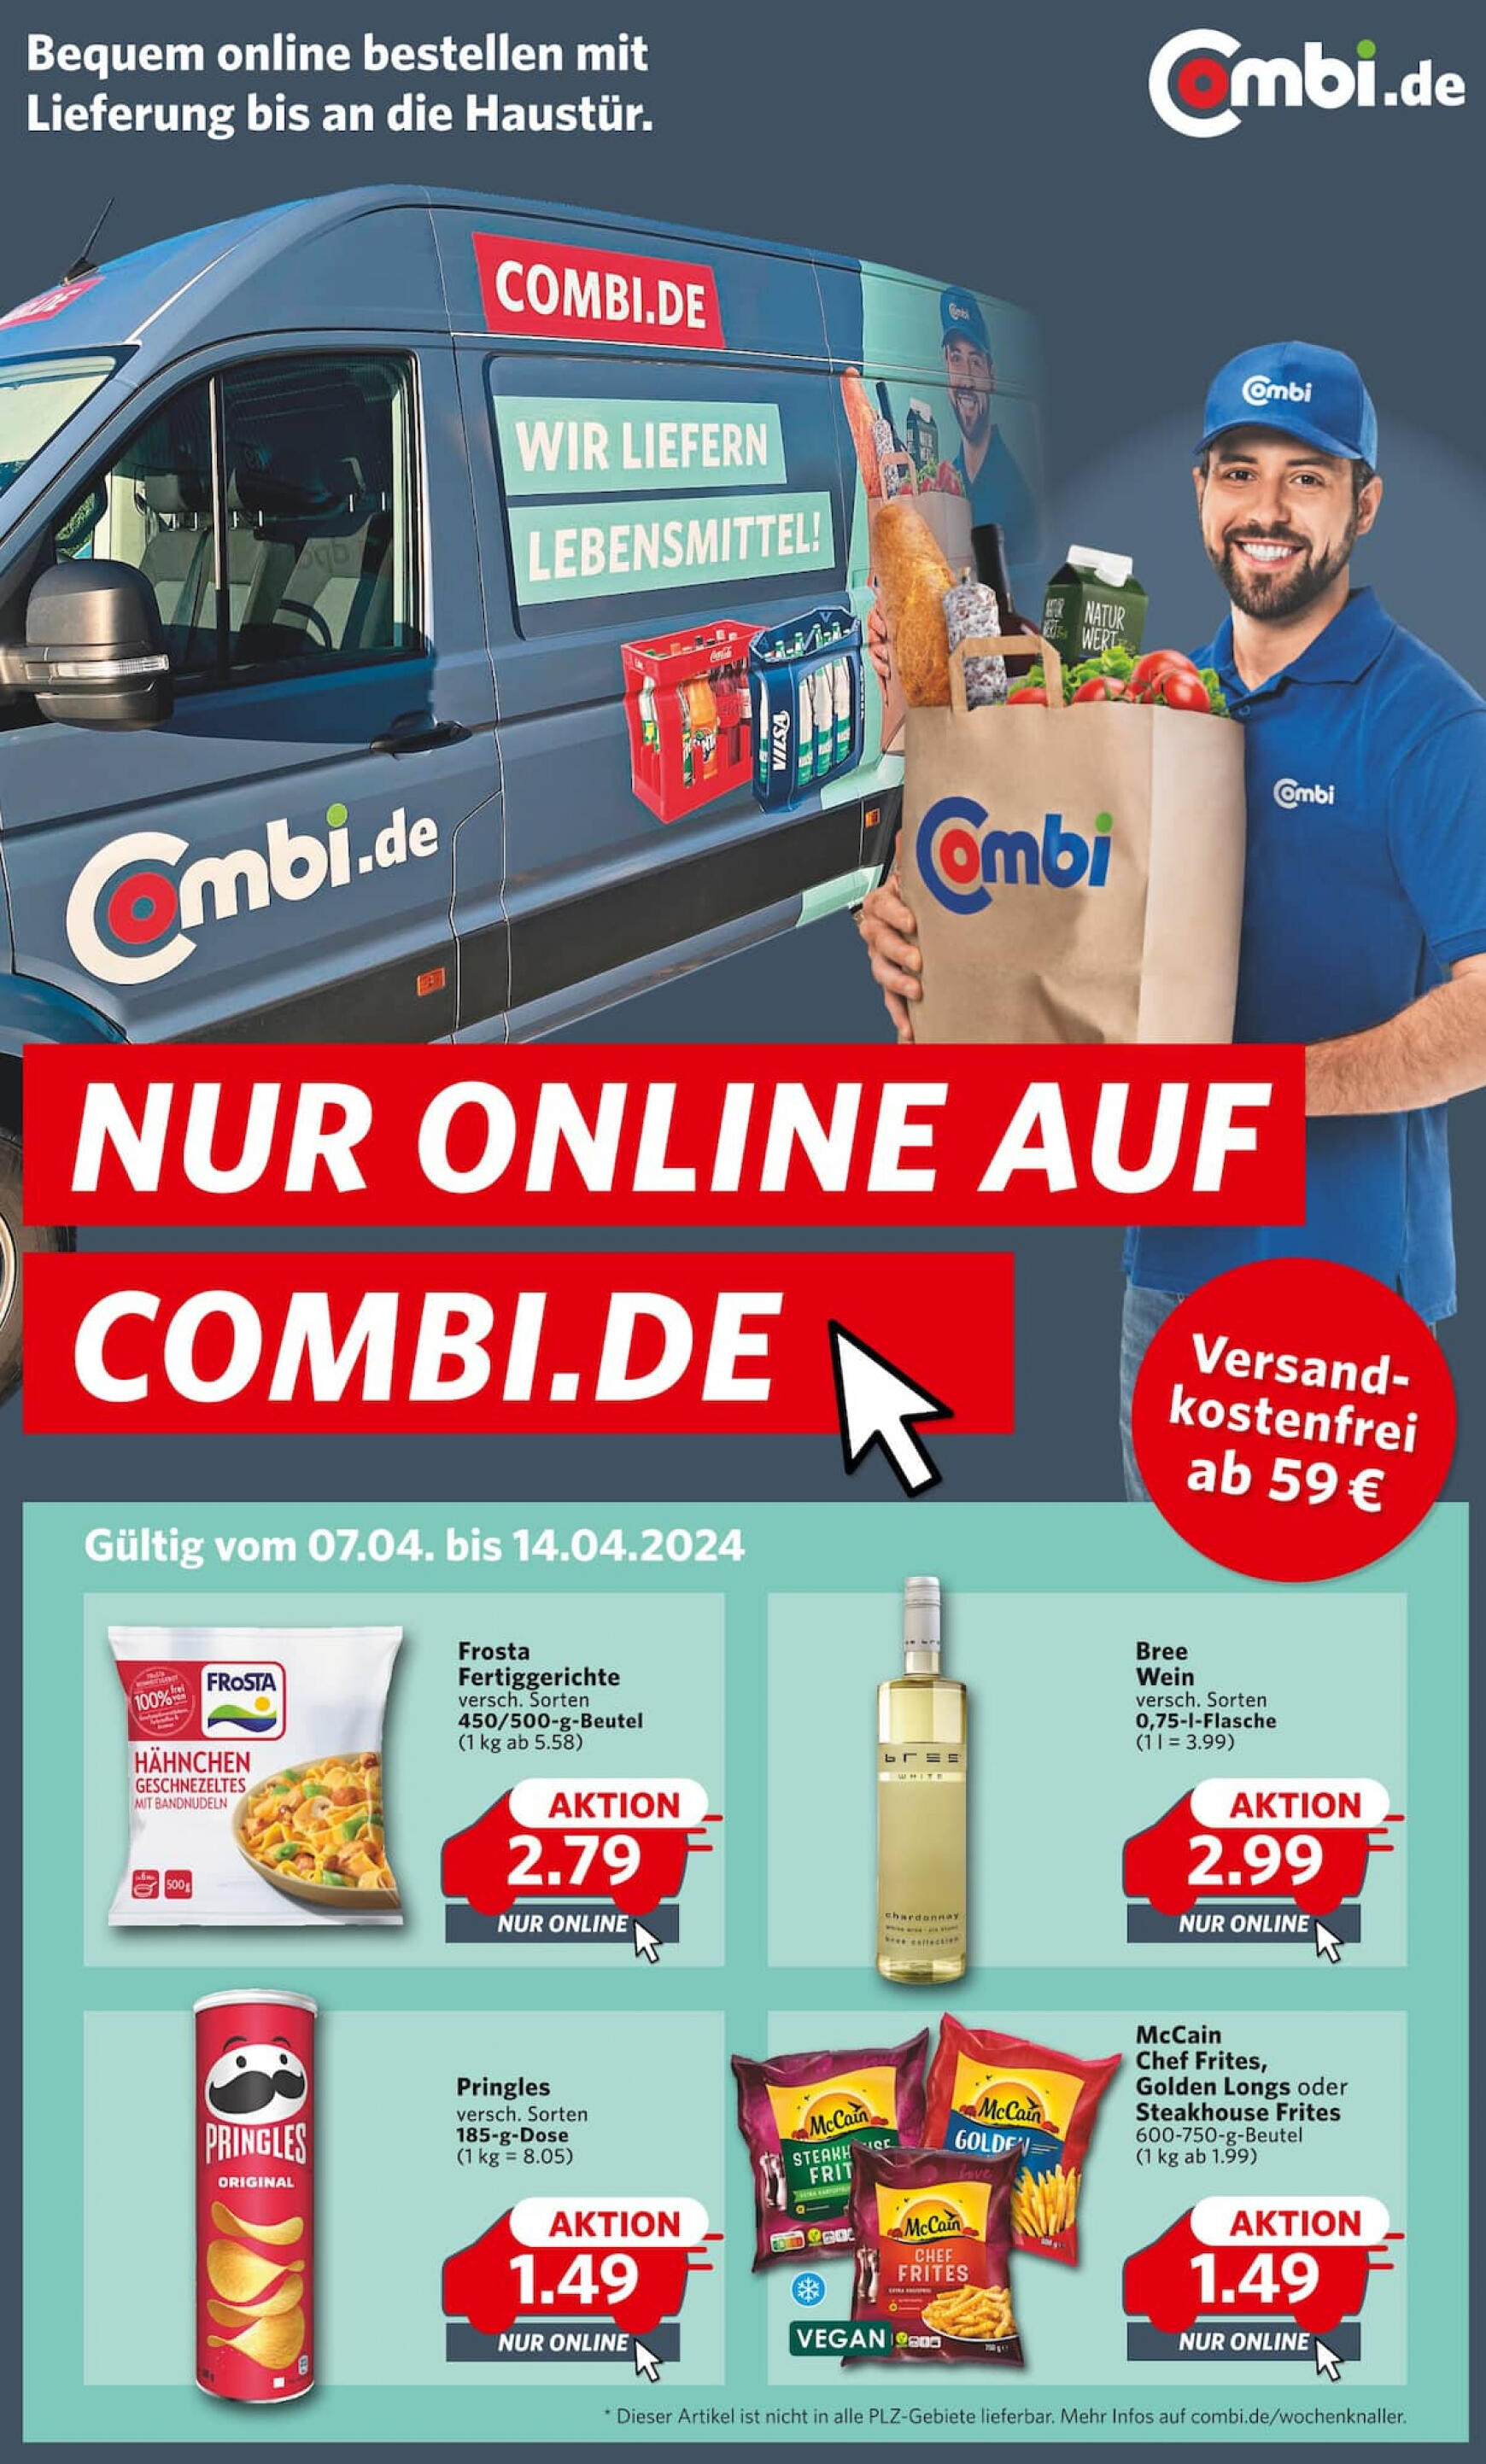 combi - Flyer Combi aktuell 07.04. - 14.04. - page: 1